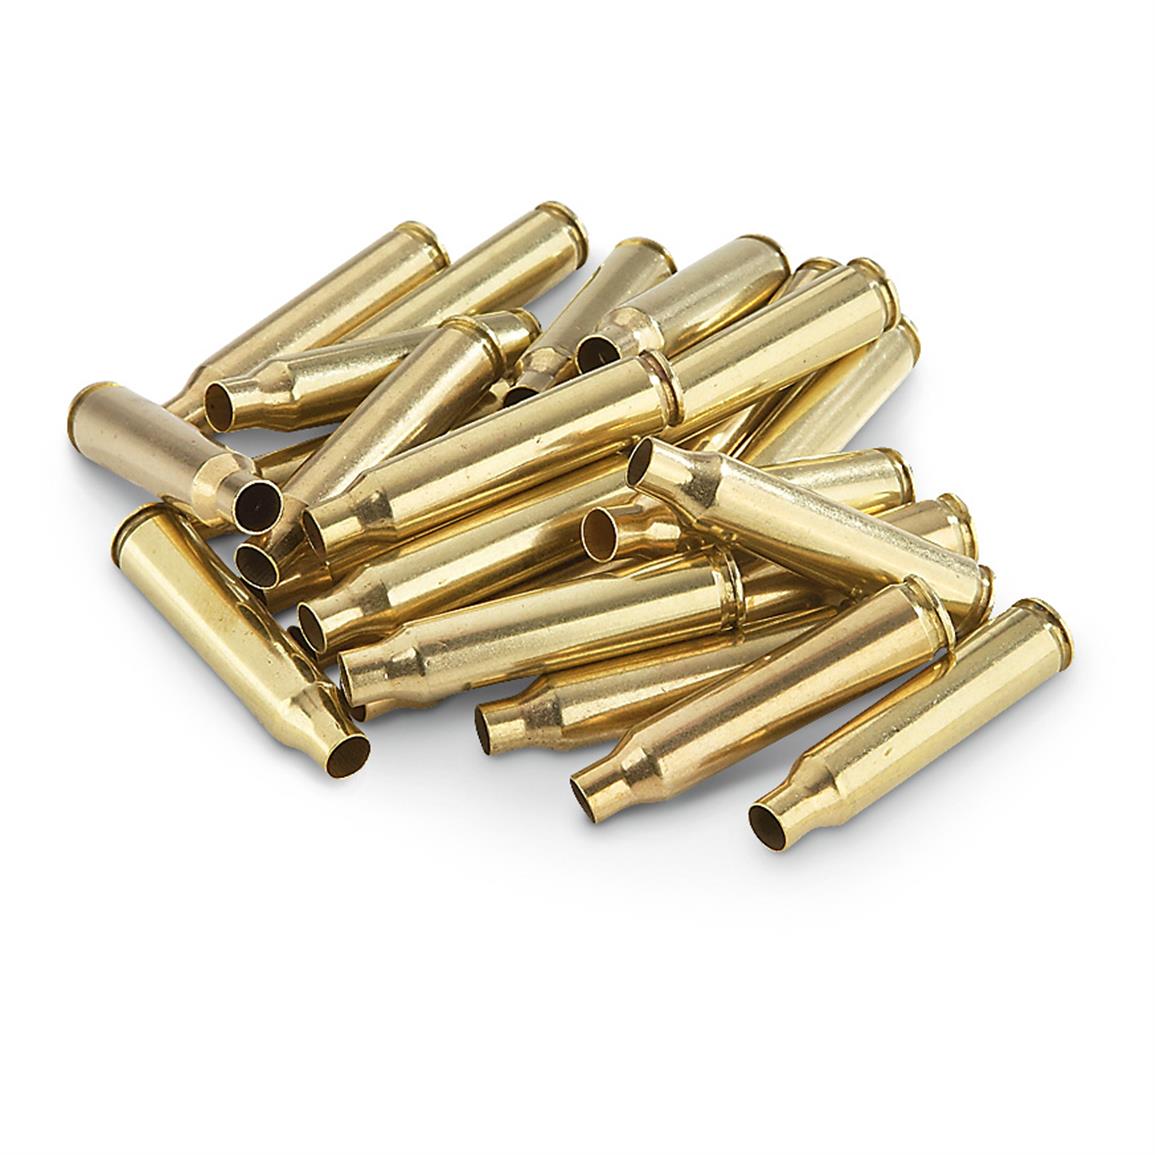 The 223 box of 500 Range Brass from H&H shooting 